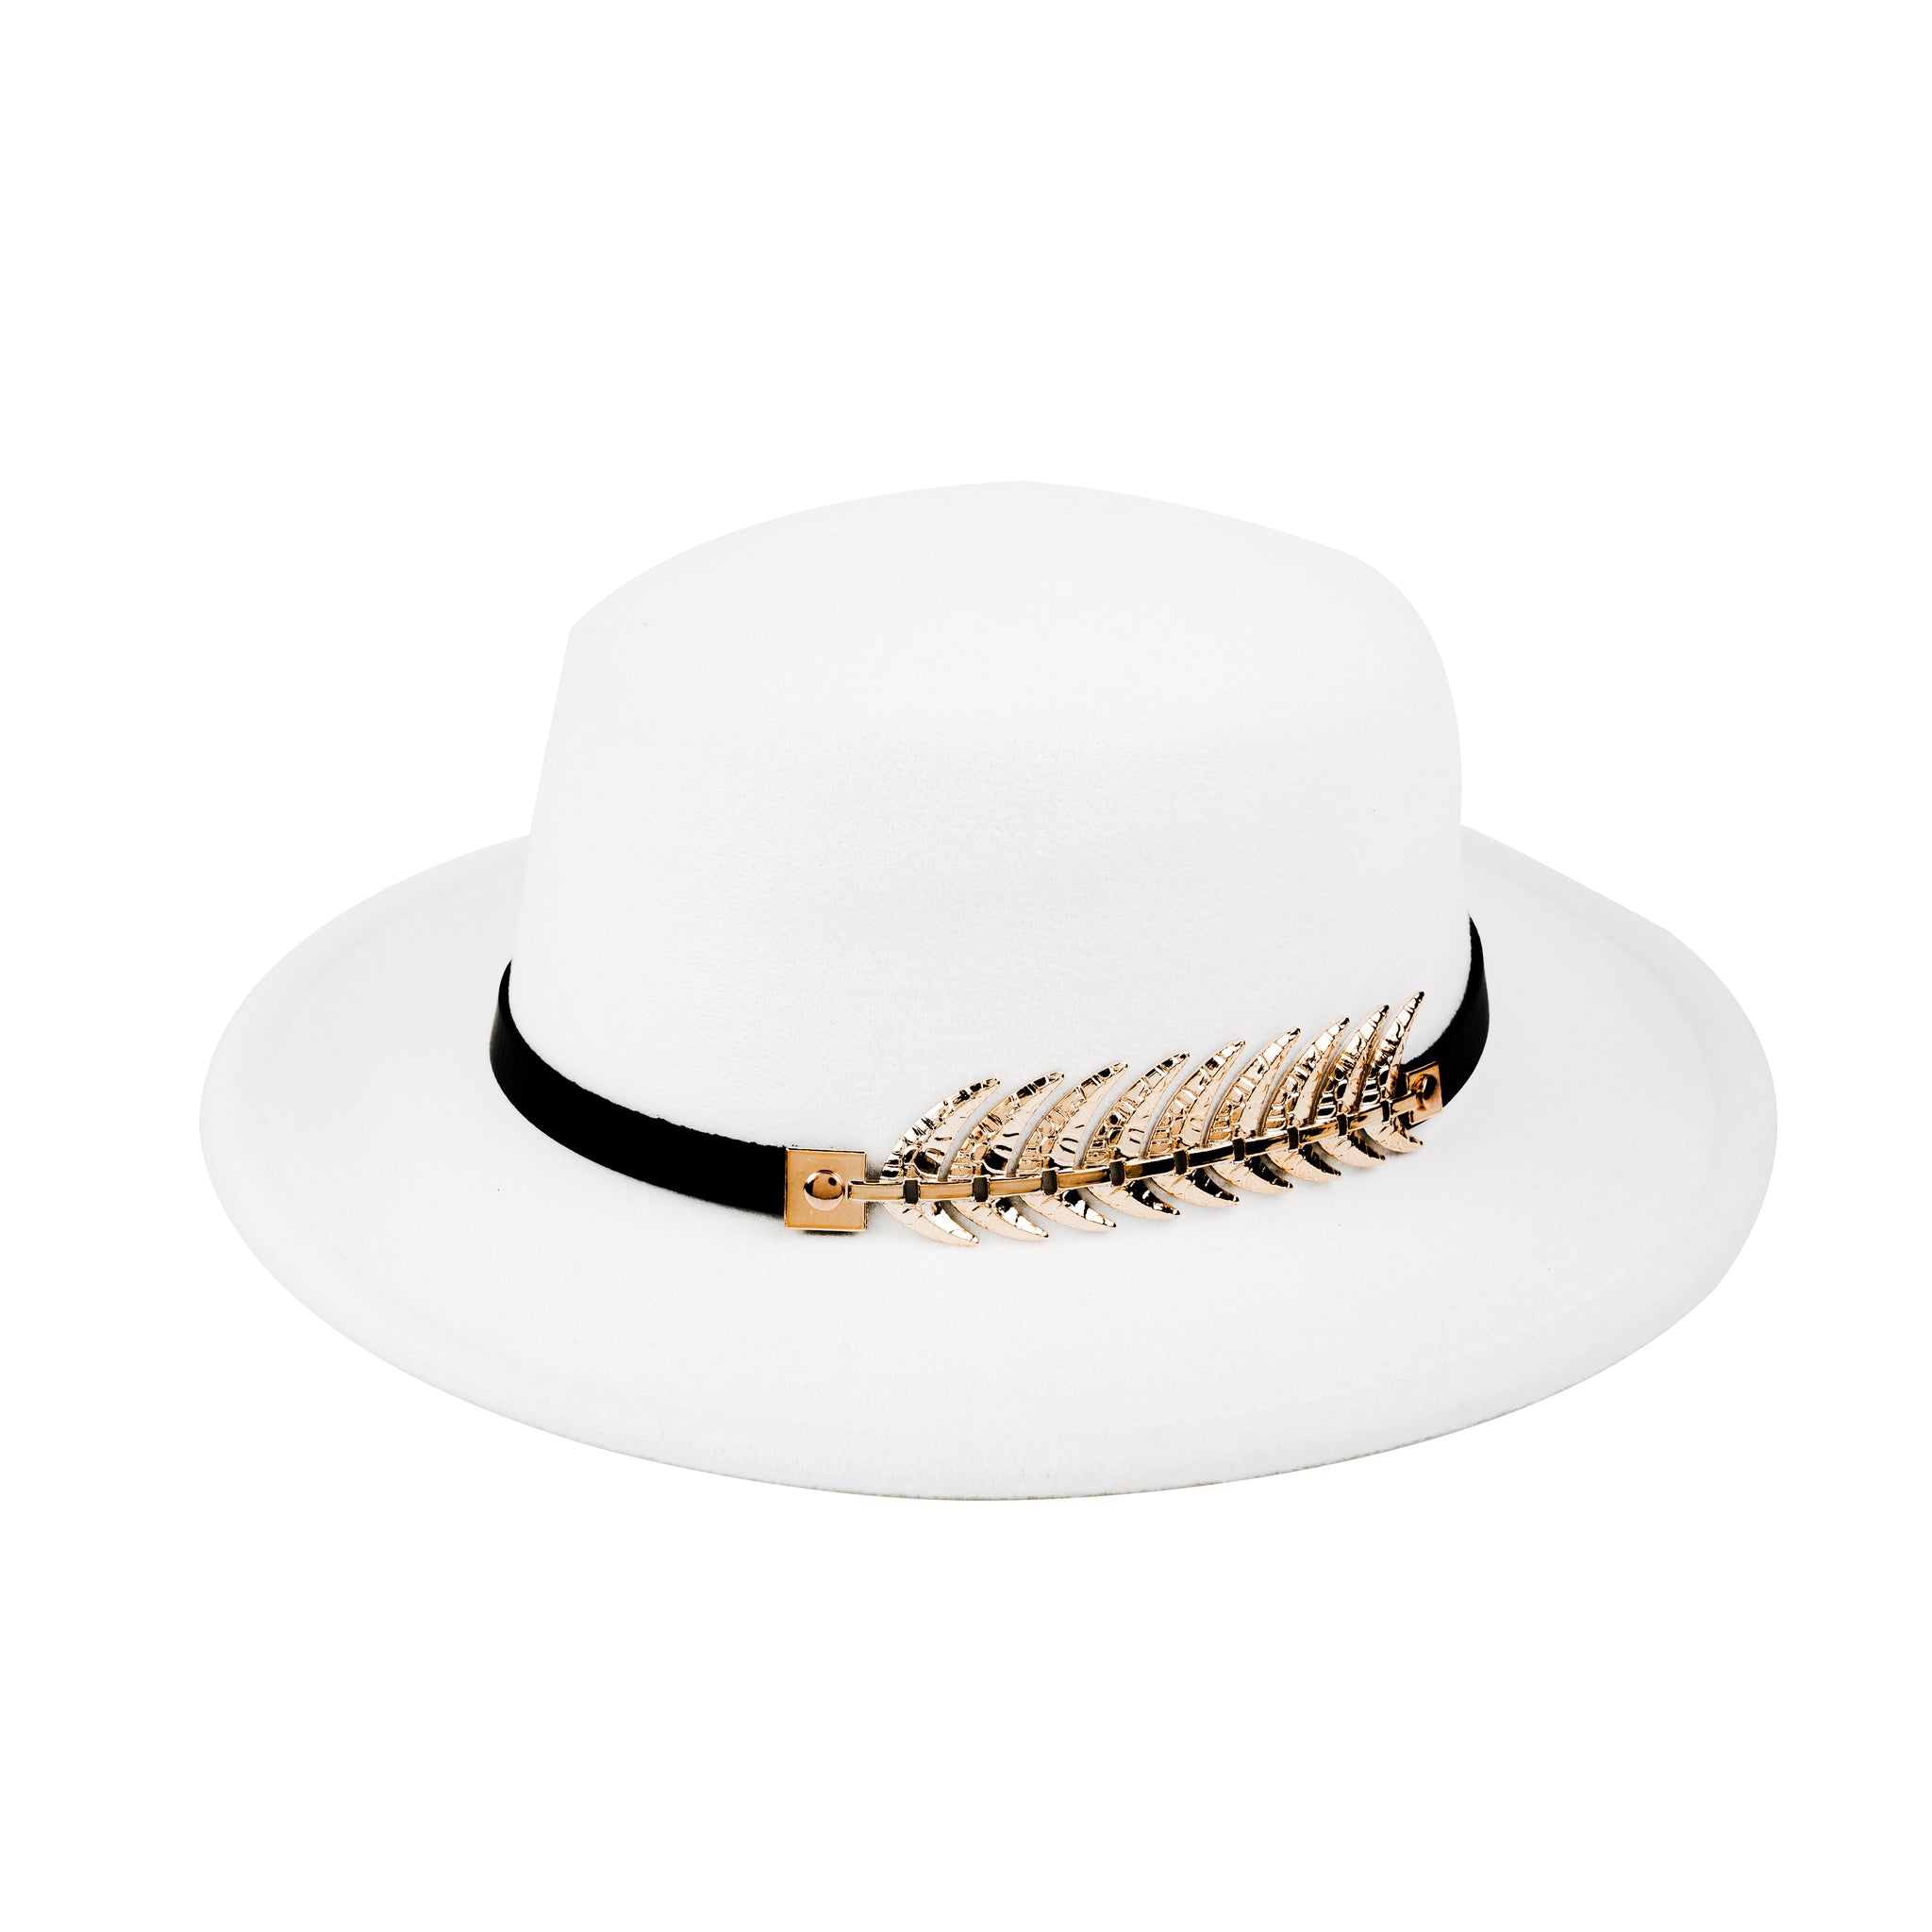 Chokore Party Panama Hat with Leaf Buckle (White)